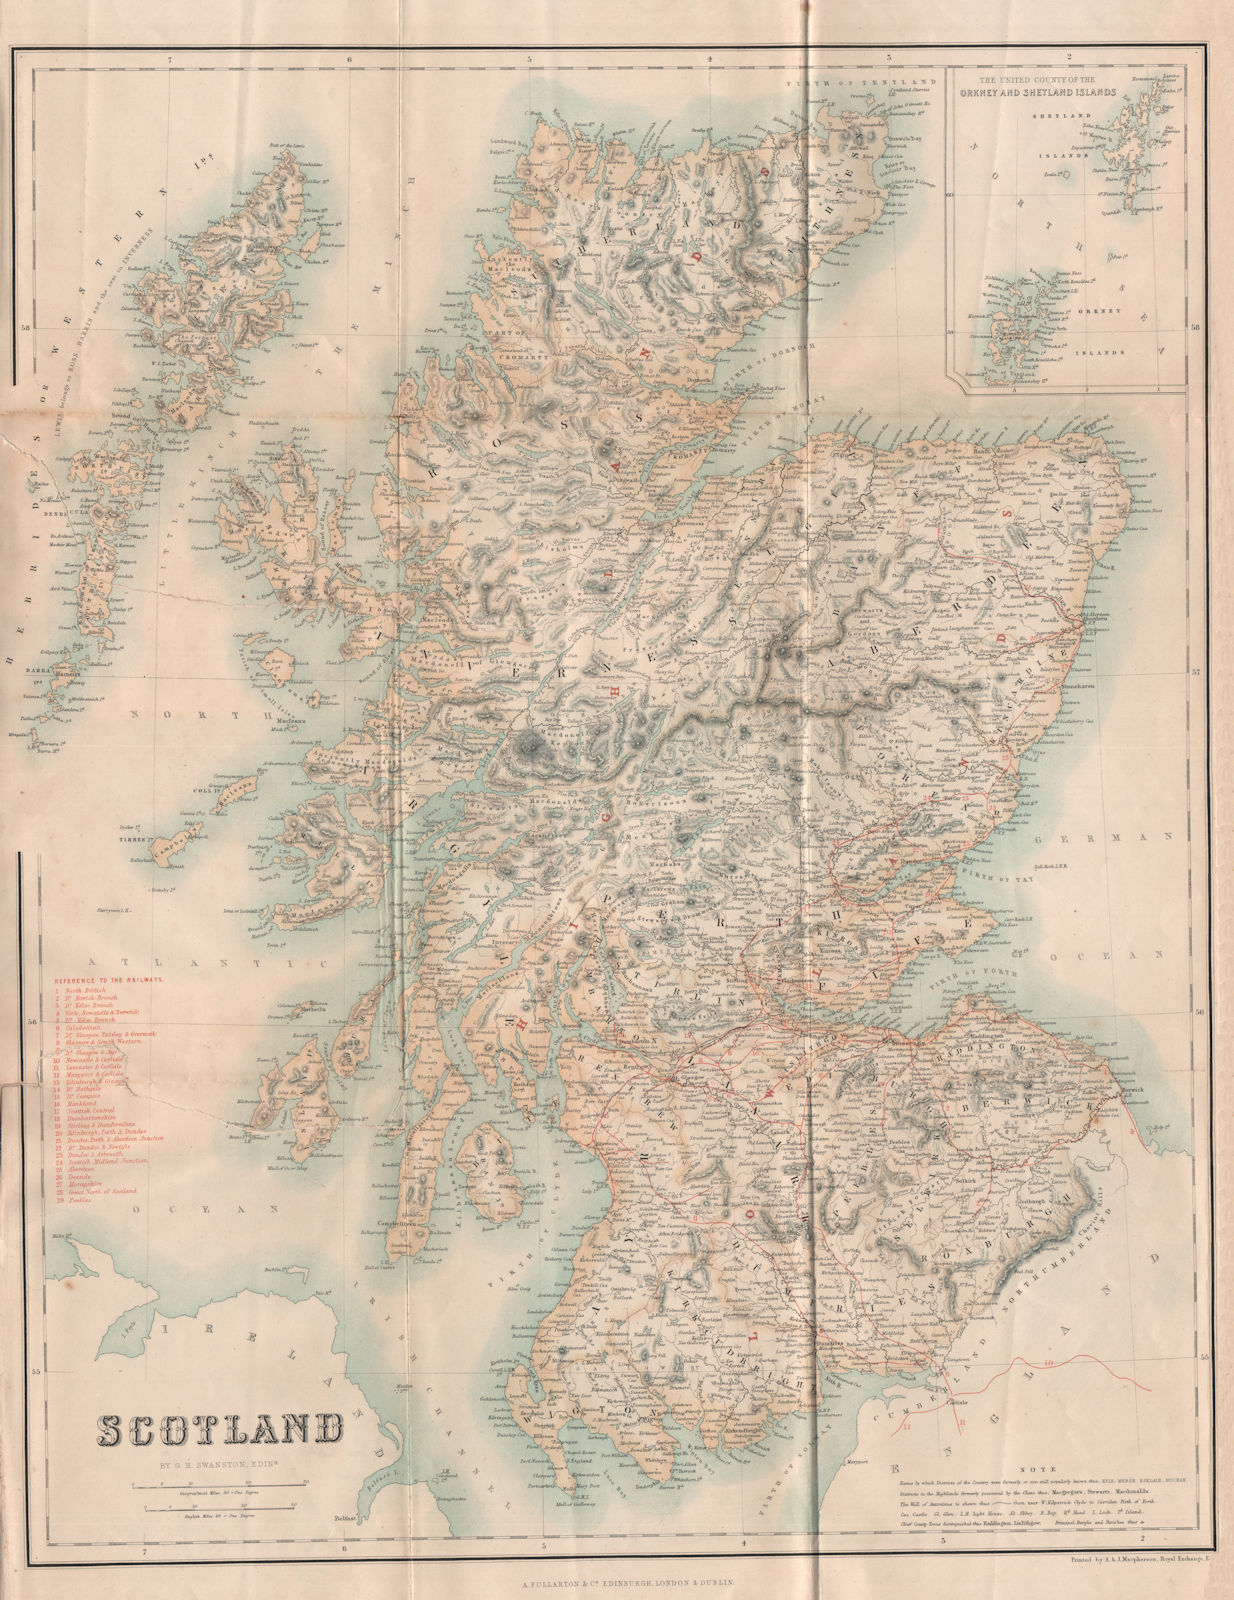 SCOTLAND showing railway lines and companies. SWANSTON 1868 old antique map